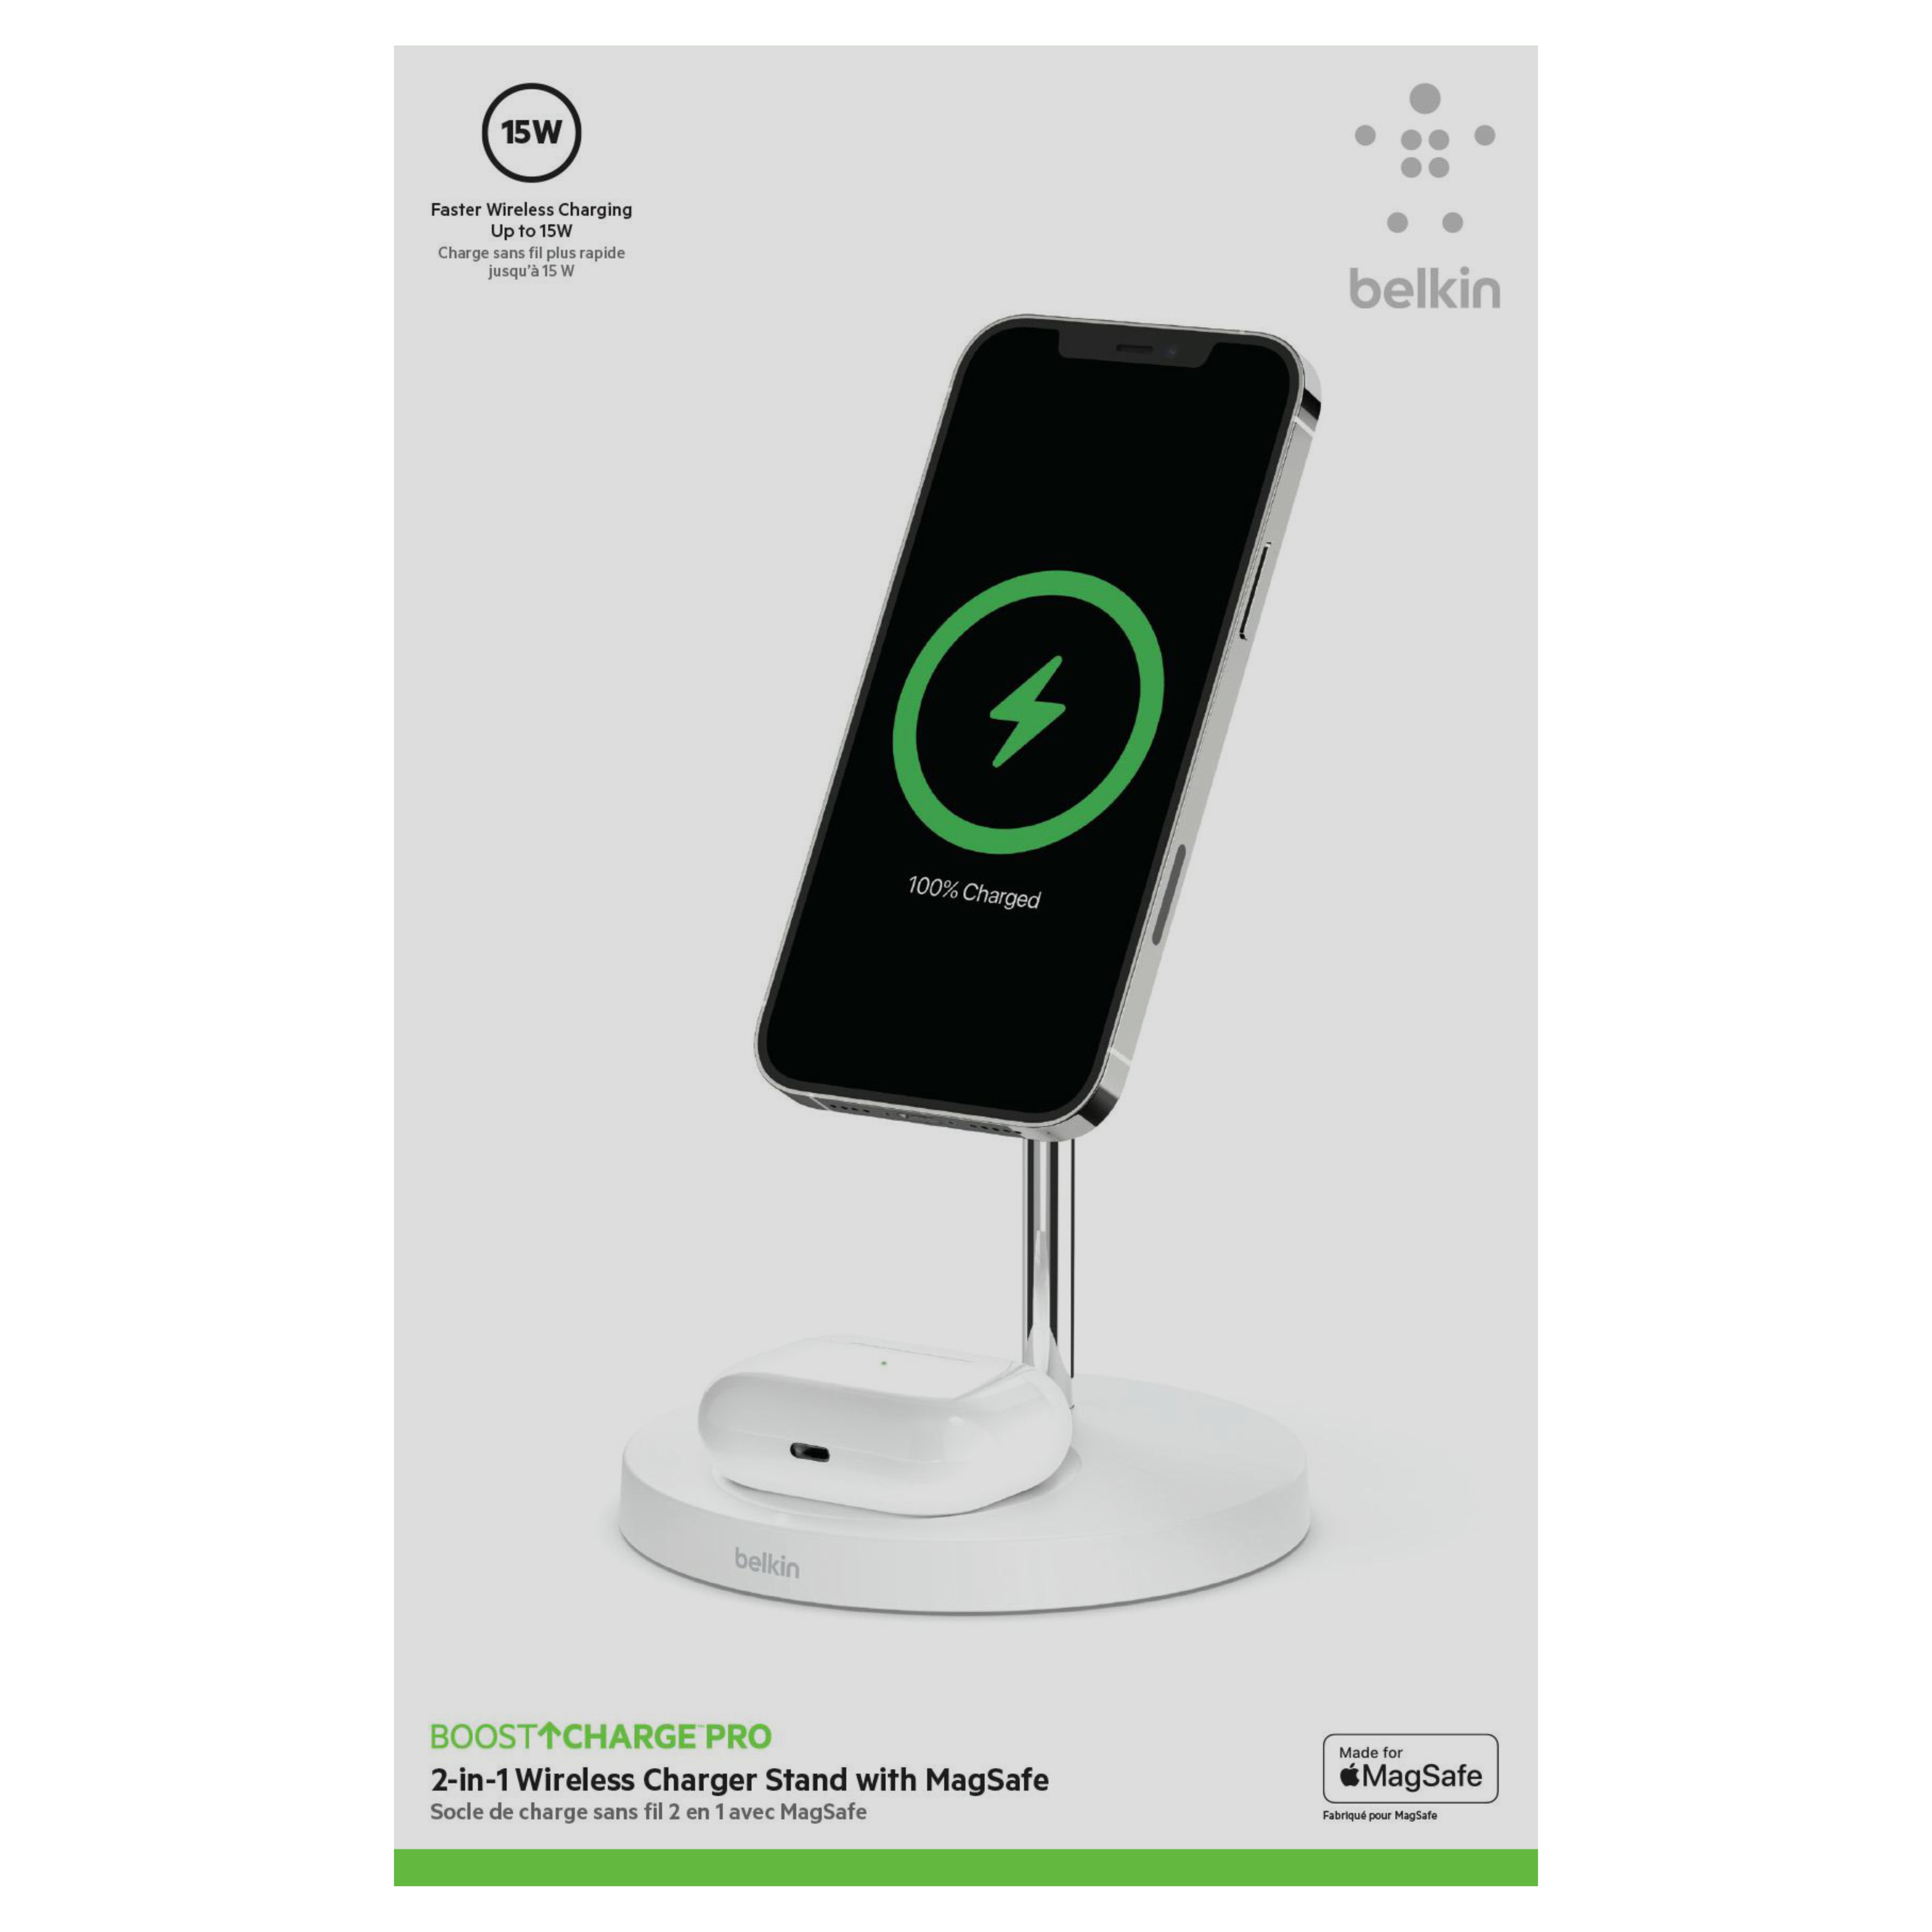 Belkin MagSafe 2-in-1 Wireless Charging Stand - Fast Charging for